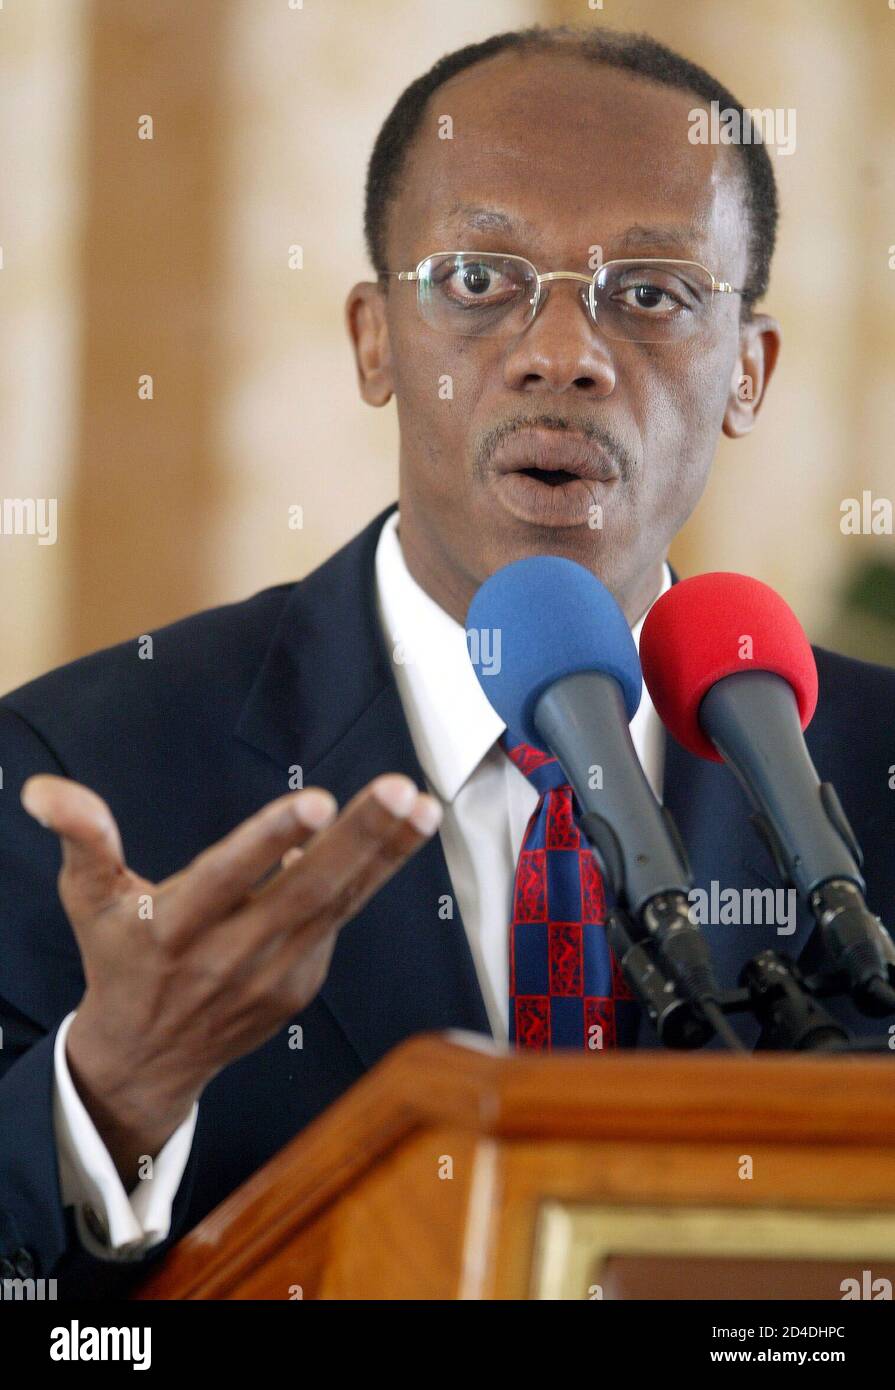 Tub Harmful Regulation Haitian President Jean-Bertrand Aristide speaks during a press conference  at the Presidential Palace, known as the White House, in Port au Prince  February 24, 2004. [Aristide appealed for international help to deal